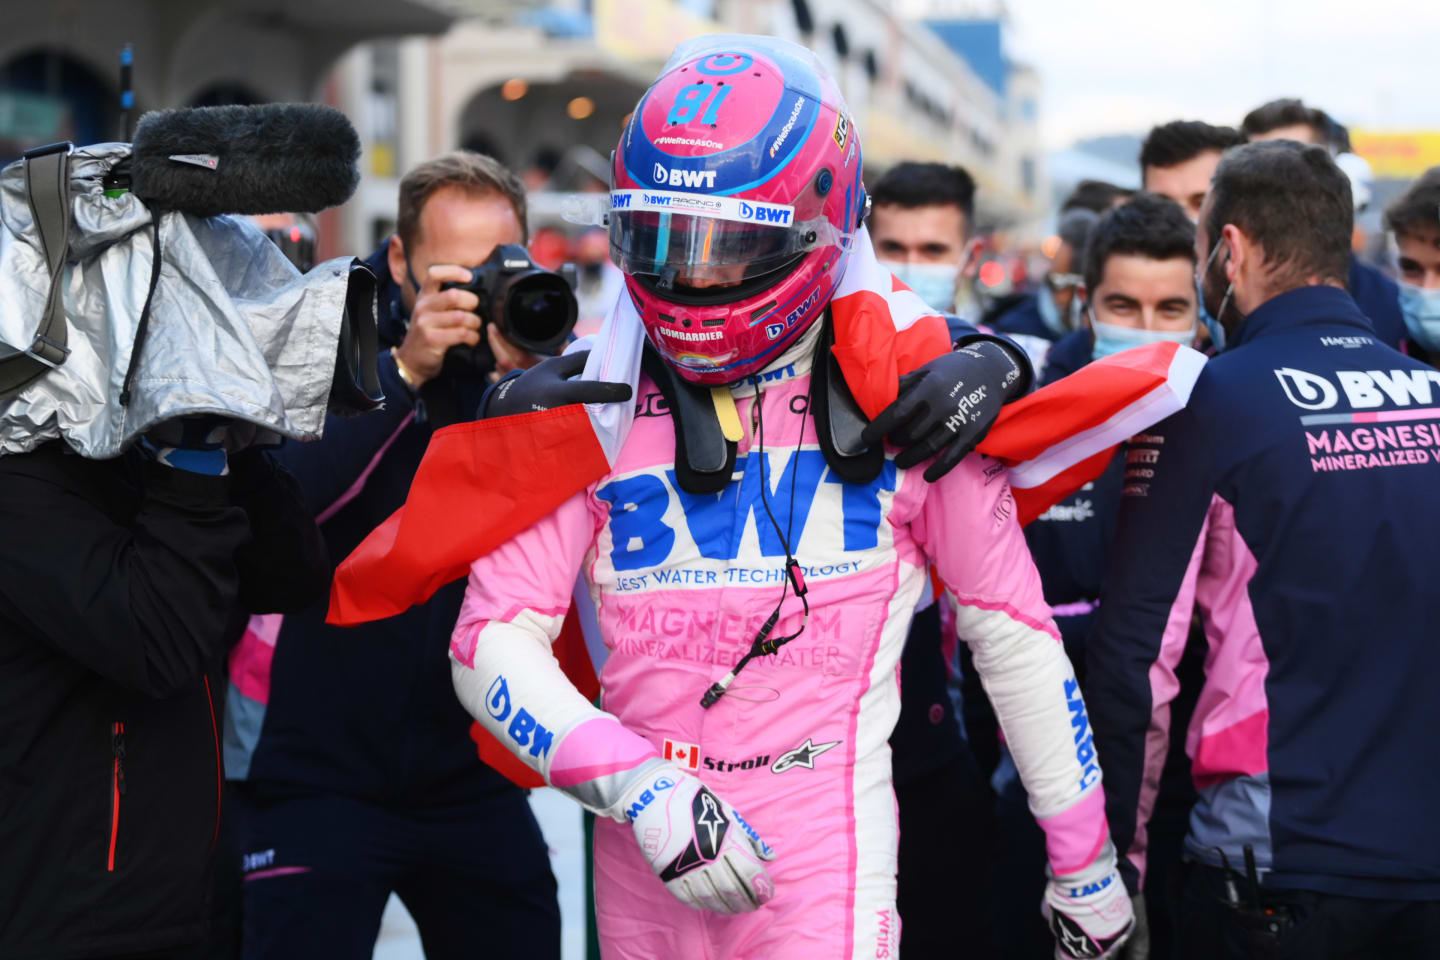 ISTANBUL, TURKEY - NOVEMBER 14: Pole position qualifier Lance Stroll of Canada and Racing Point celebrates with team members in parc ferme during qualifying ahead of the F1 Grand Prix of Turkey at Intercity Istanbul Park on November 14, 2020 in Istanbul, Turkey. (Photo by Clive Mason/Getty Images)